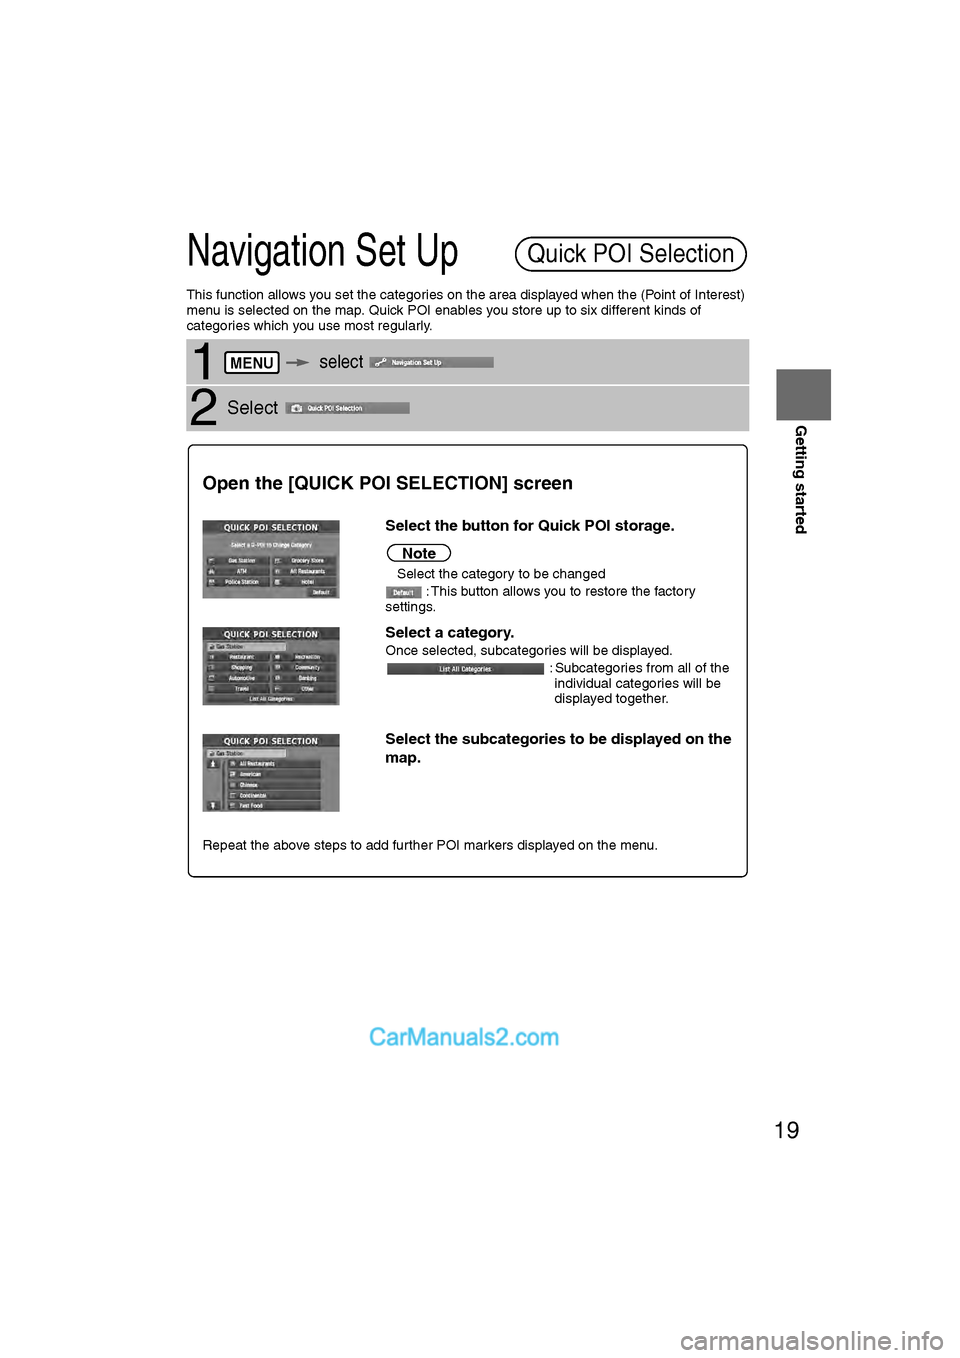 MAZDA MODEL CX-9 2008  Navigation Manual (in English) 19
Getting started
Ifnecessary
Rear View 
Monitor
Navigation Set Up
This function allows you set the categories on the area displayed when the (Point of Interest) 
menu is selected on the map. Quick P